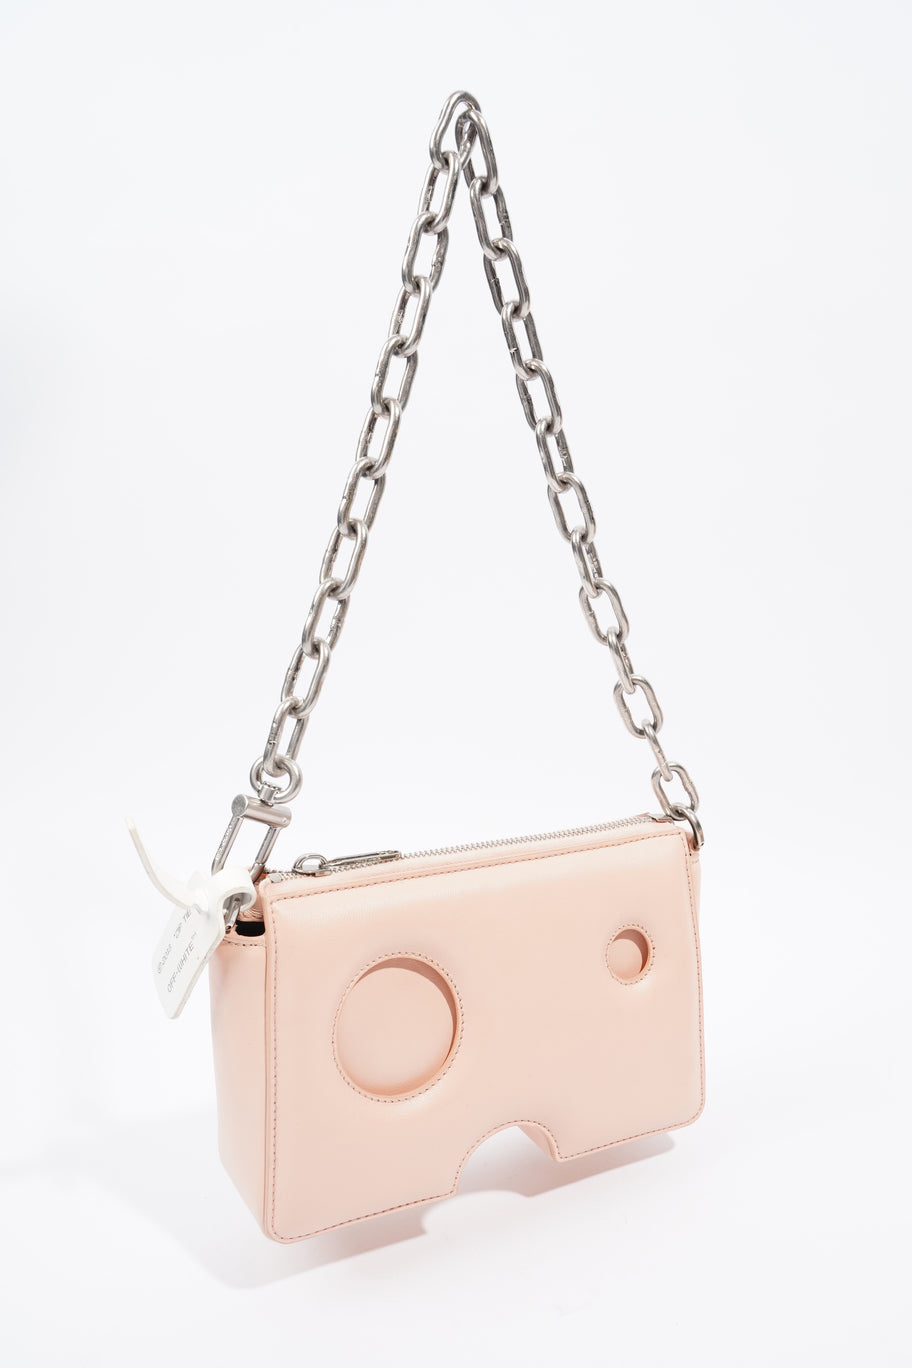 Burrow Zipped Pouch 20 Baby Pink Leather Image 7